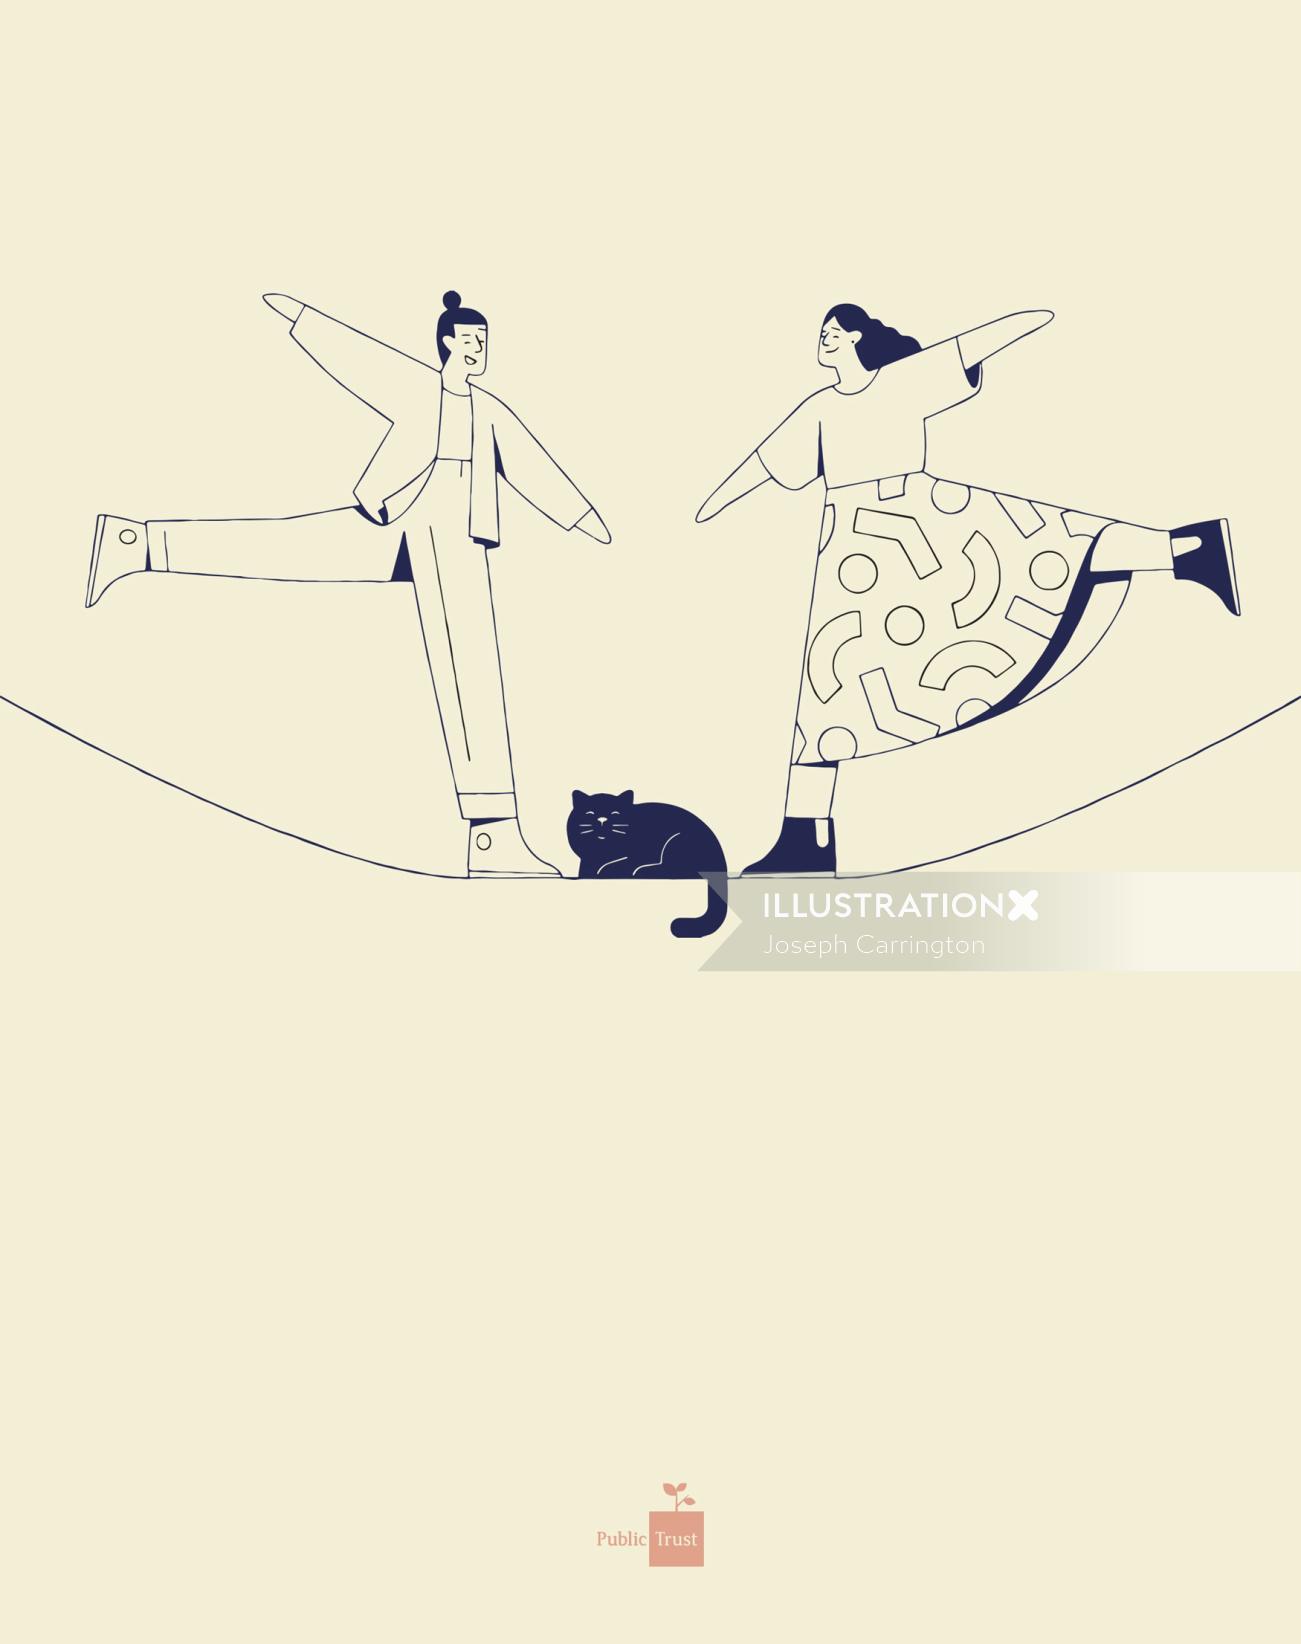 Graphic couple with pet dancing on rope